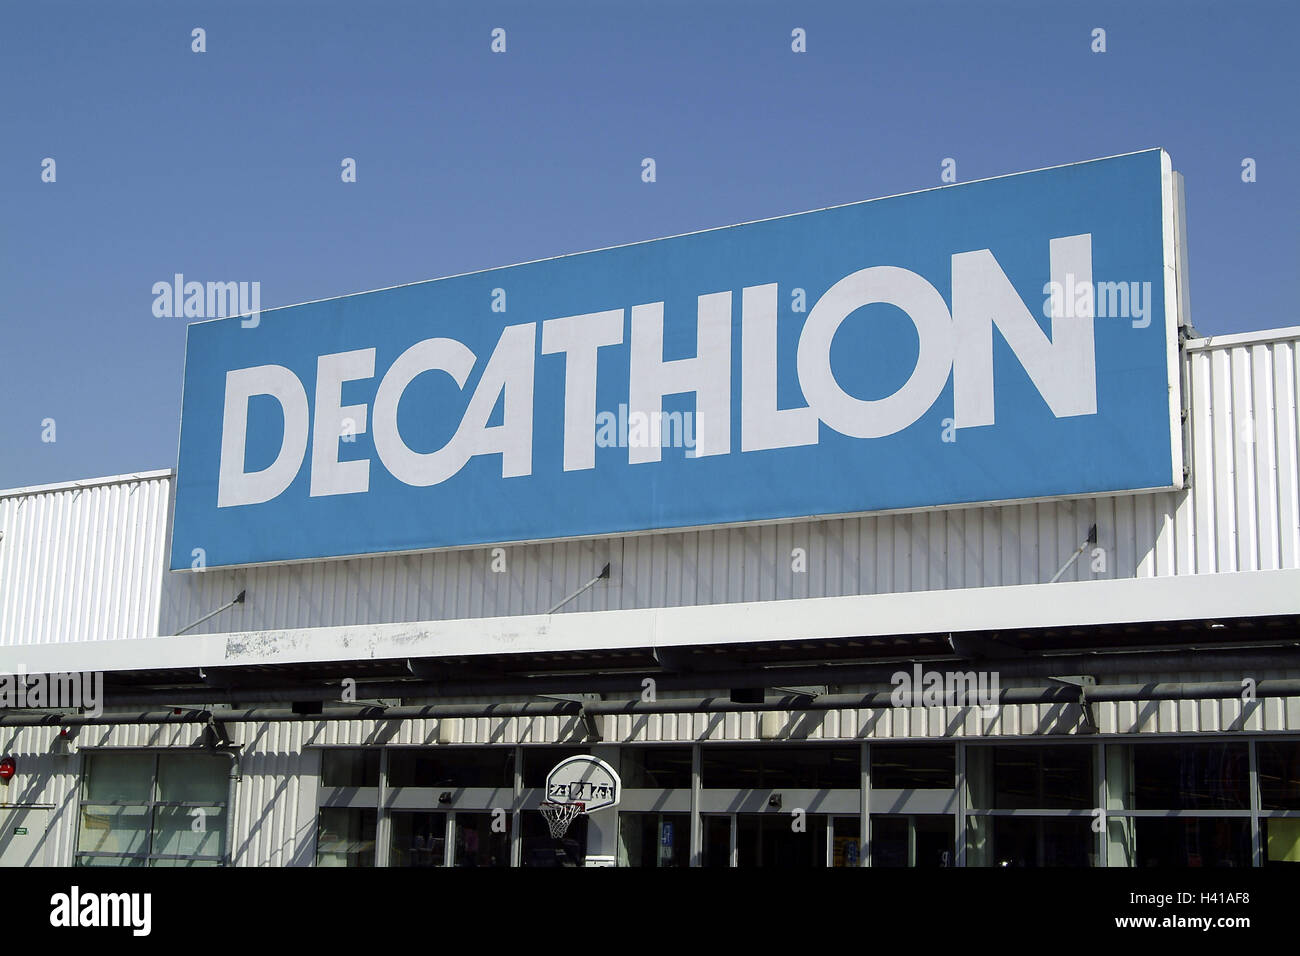 about decathlon company